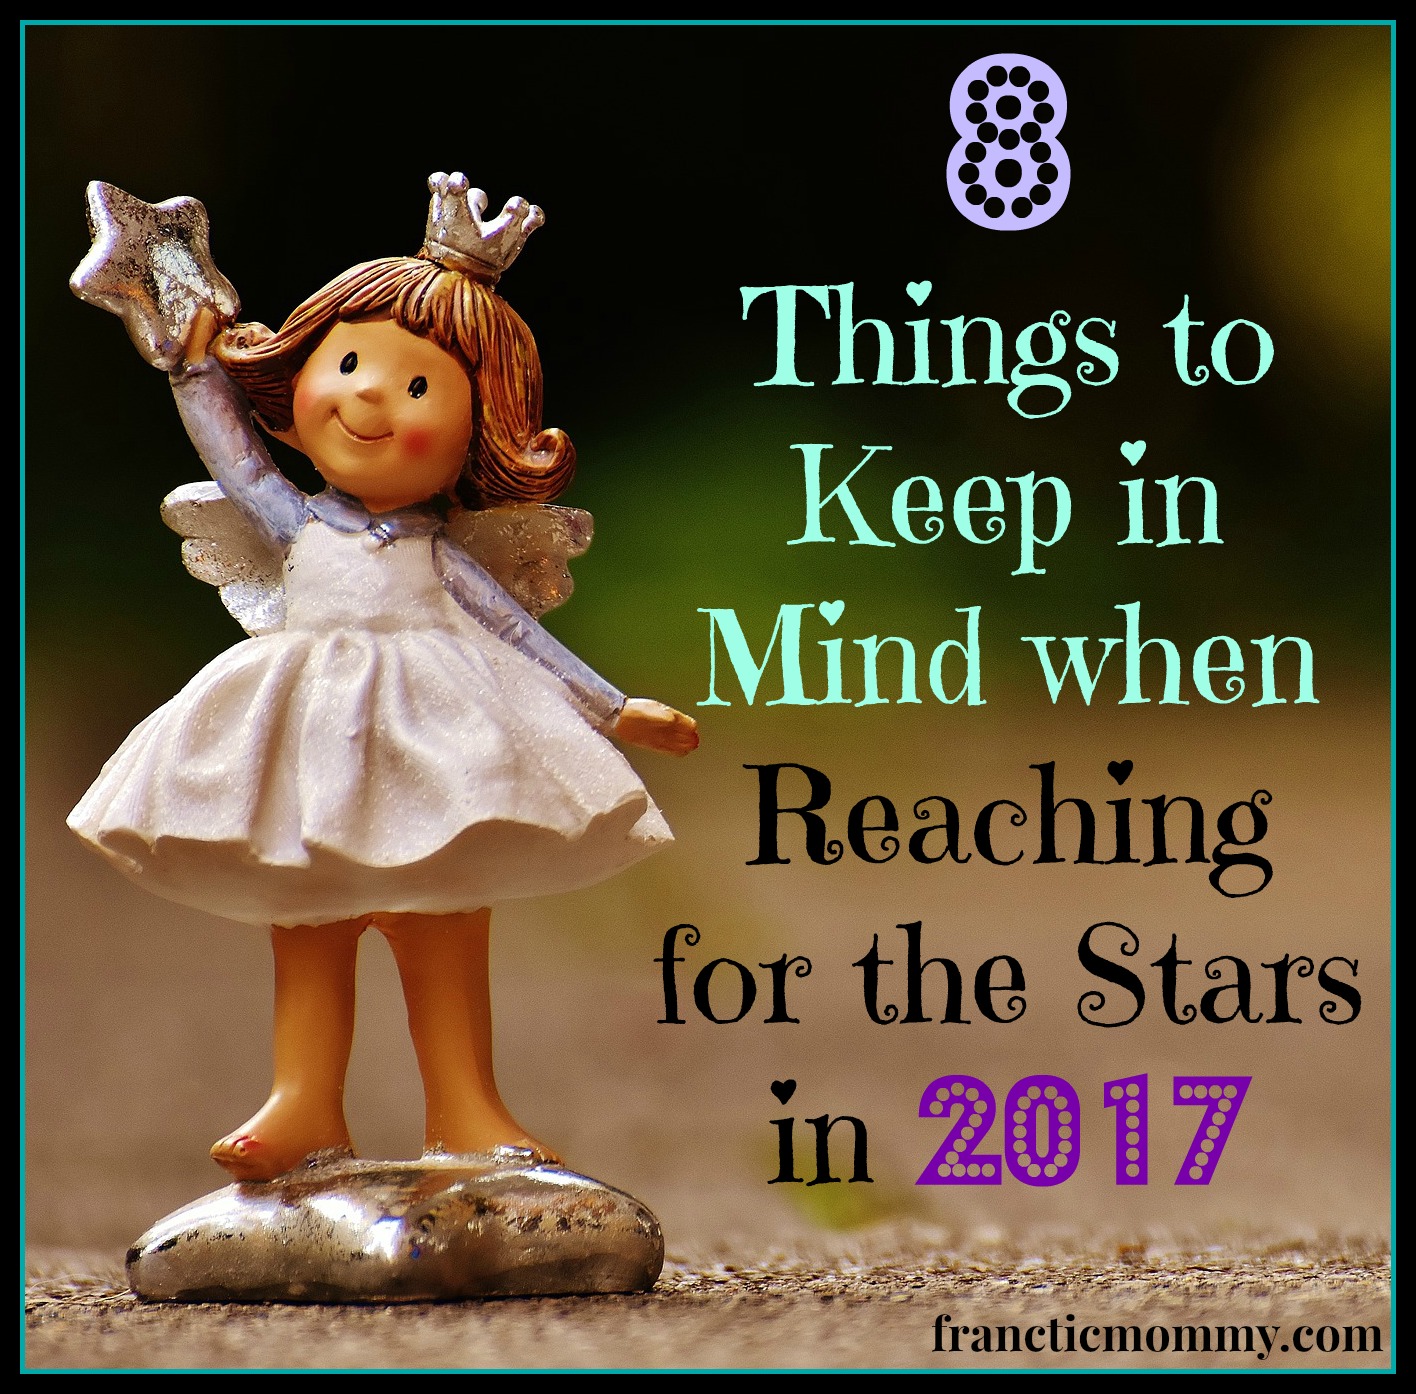 8 Things to Keep in Mind when Reaching for the Stars in 2017